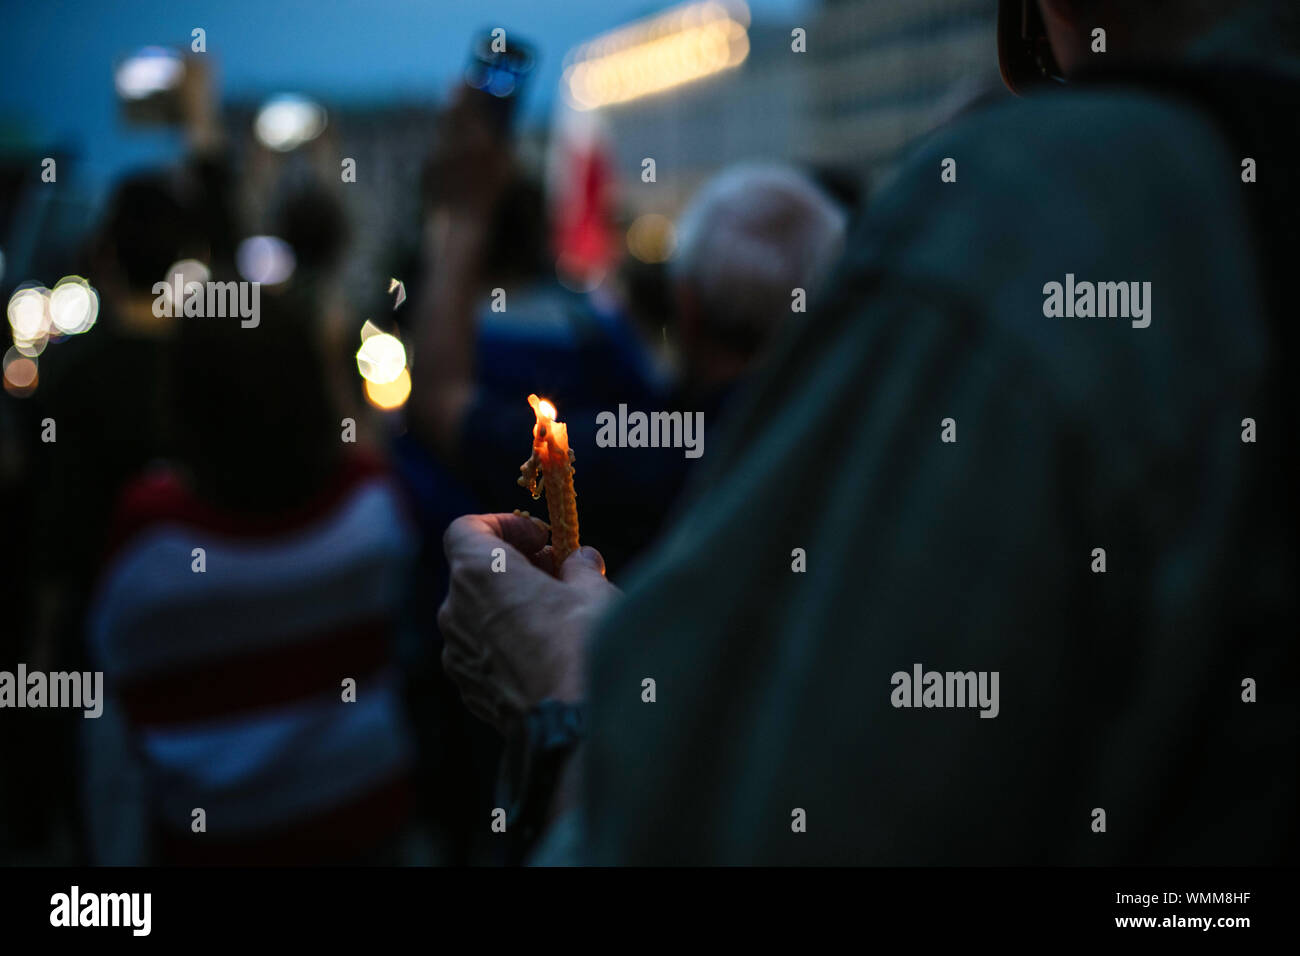 Midsection Of Protestor Holding Burning Candle During Protest At Night Stock Photo